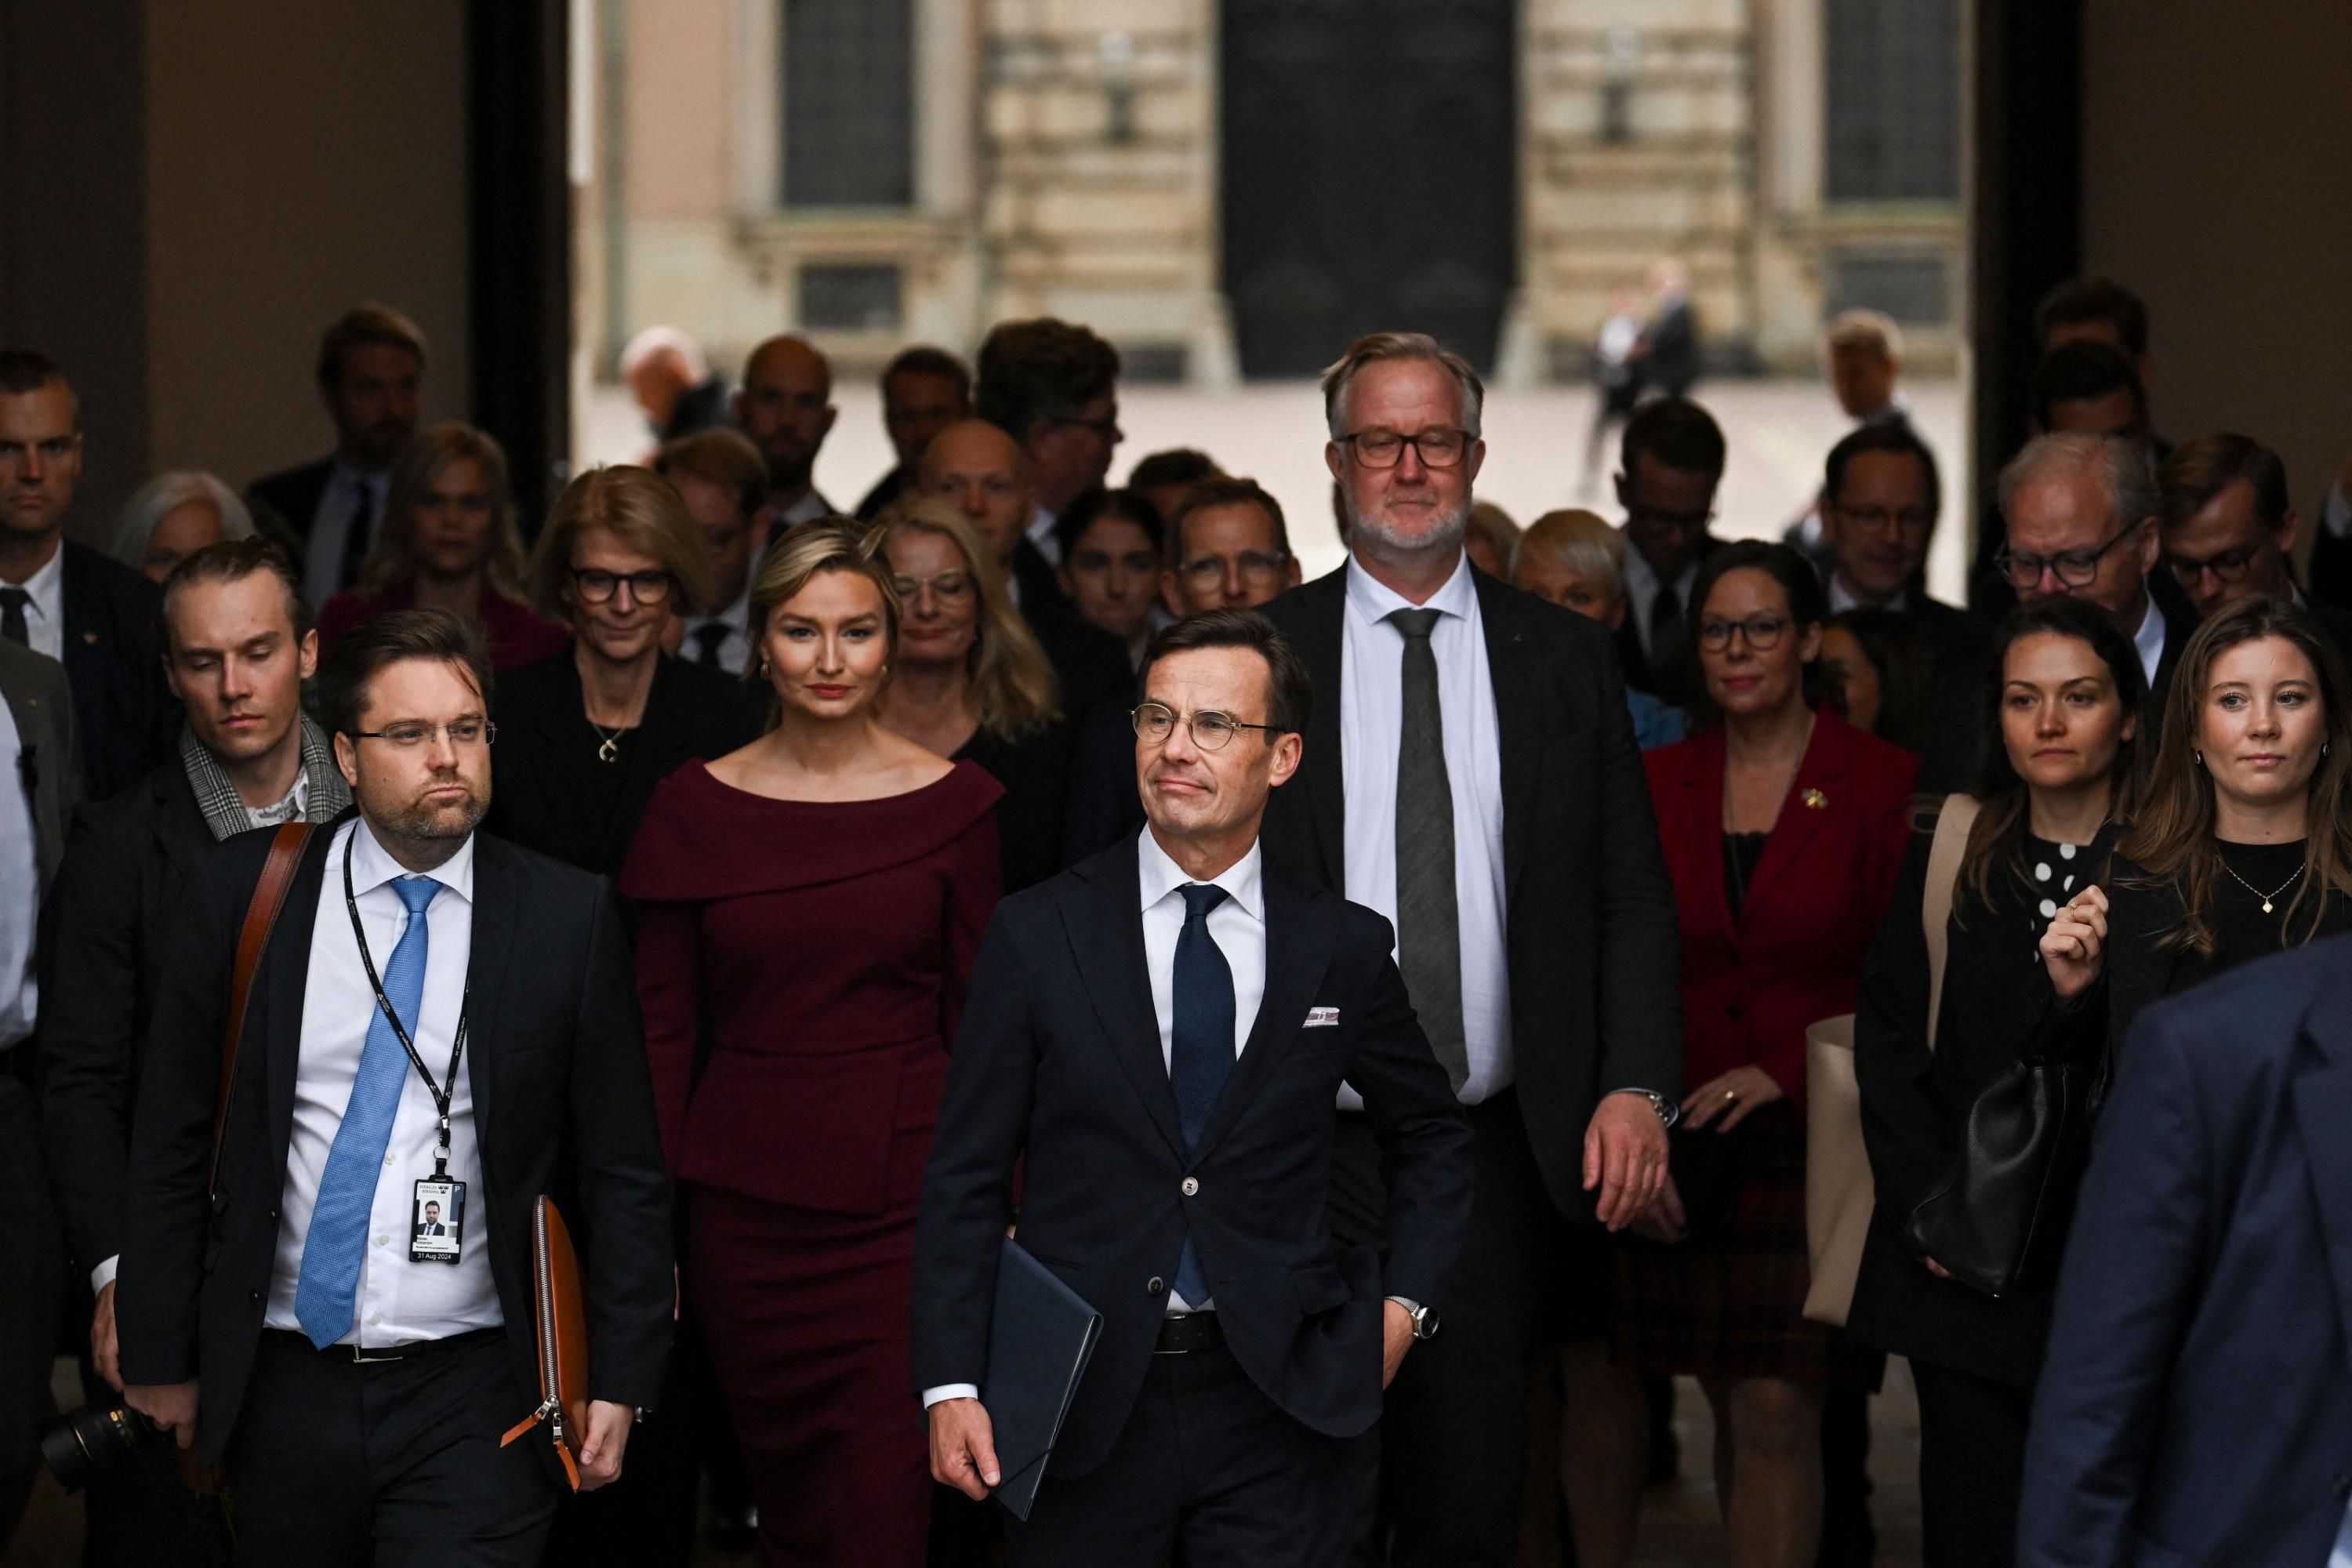 Sweden's right-wing prime minister walks with members of the new government